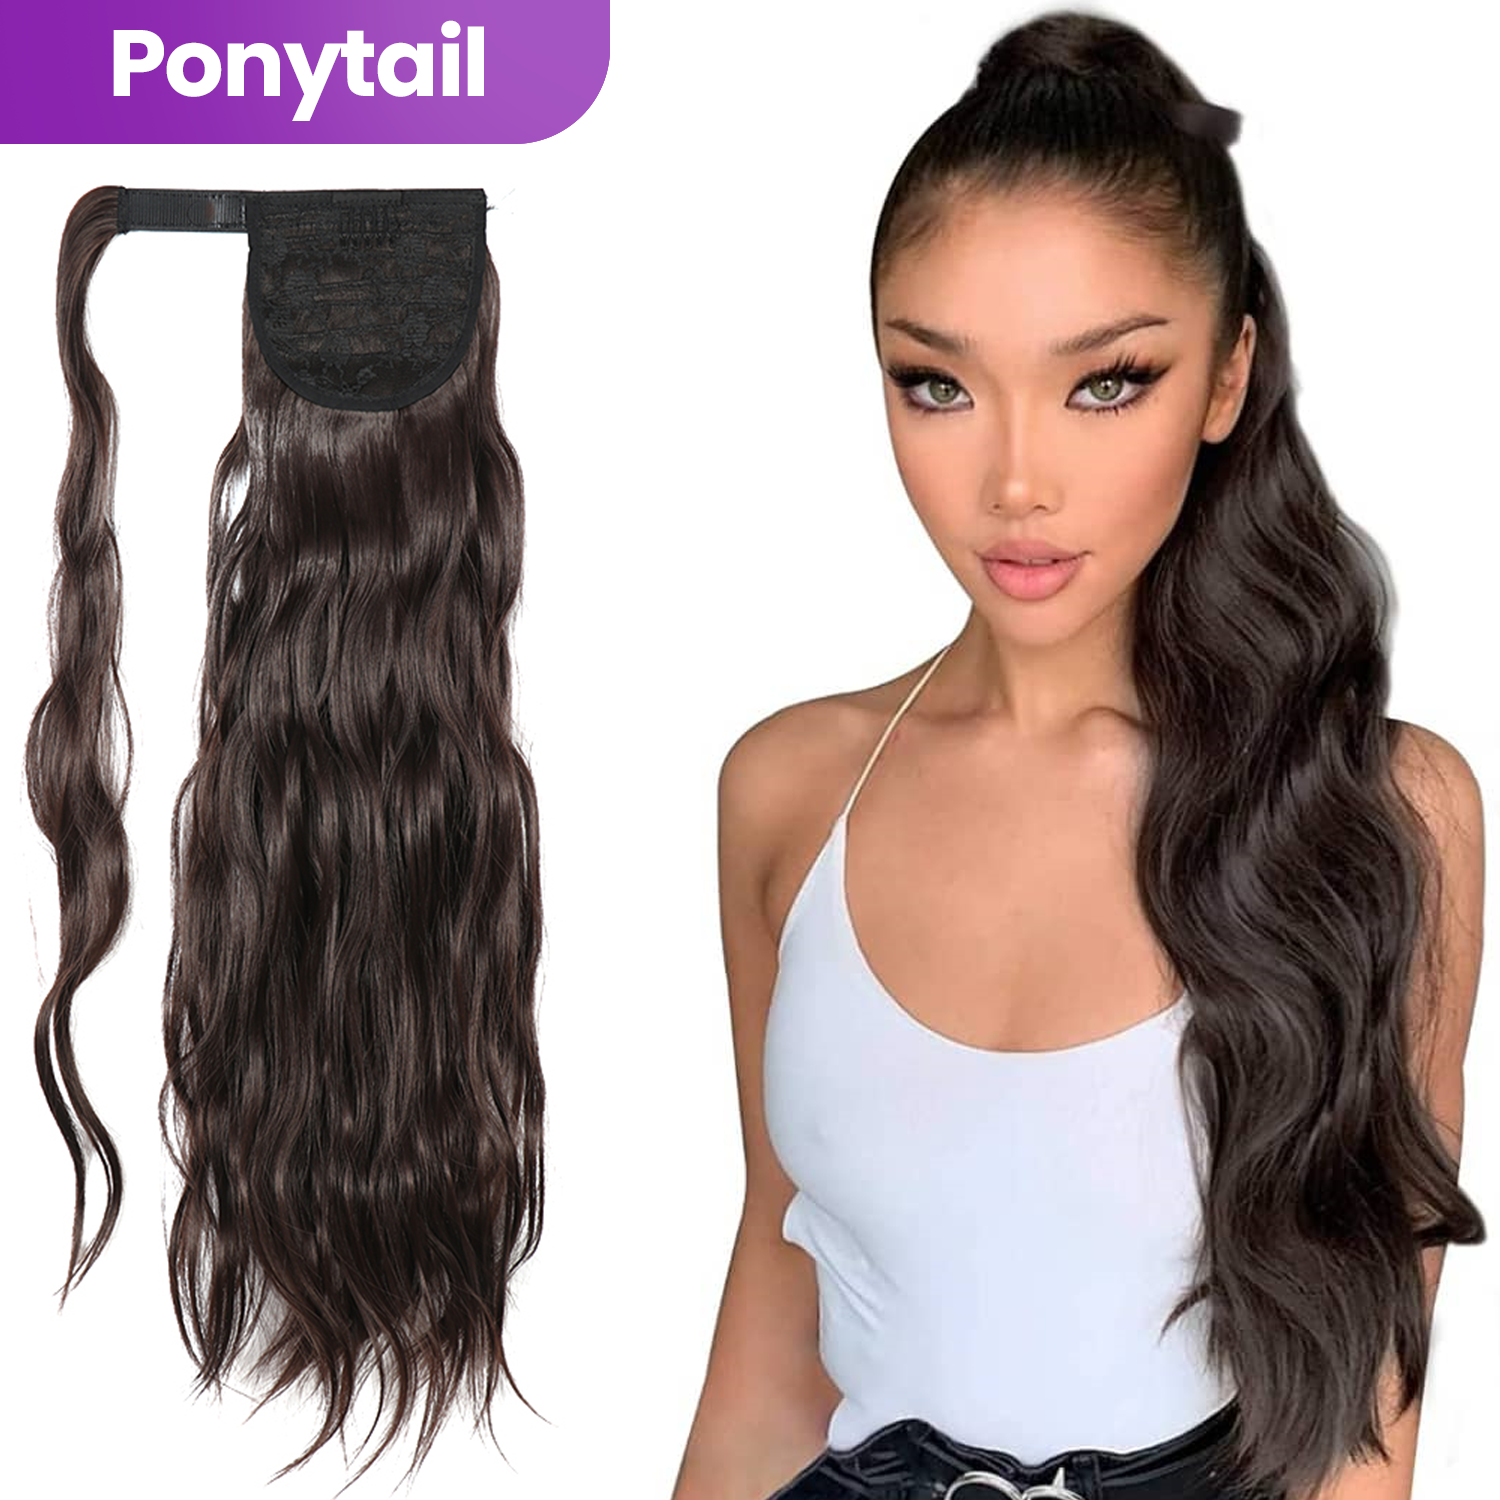 Ponytail Extensions Donkerbruin Golvend - Paardenstaart 70 cm